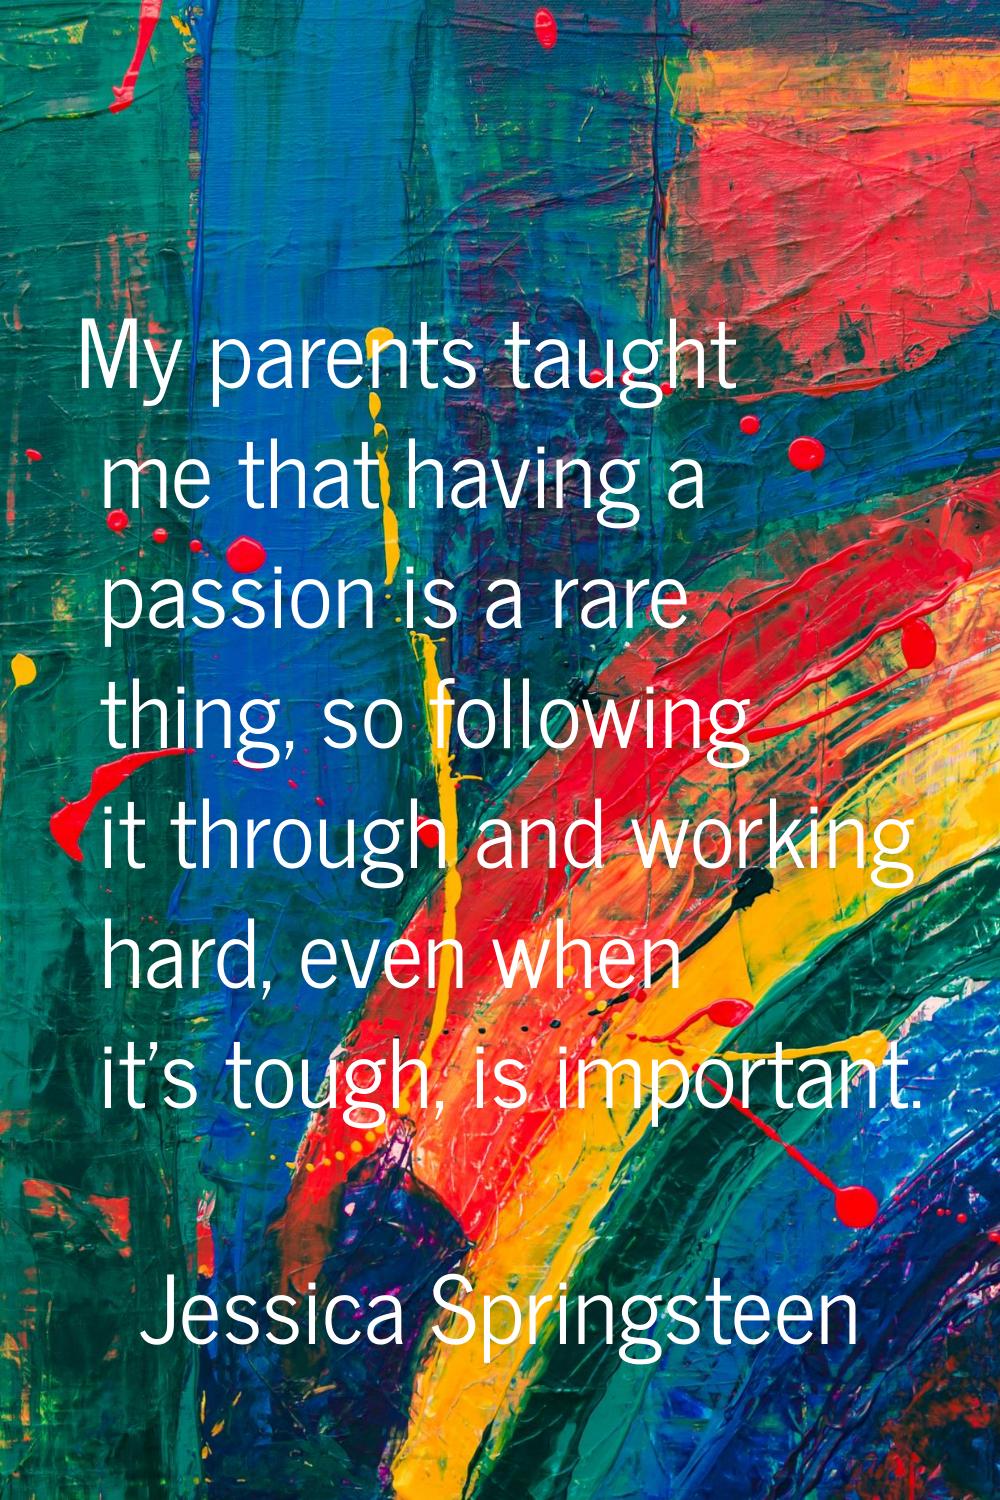 My parents taught me that having a passion is a rare thing, so following it through and working har